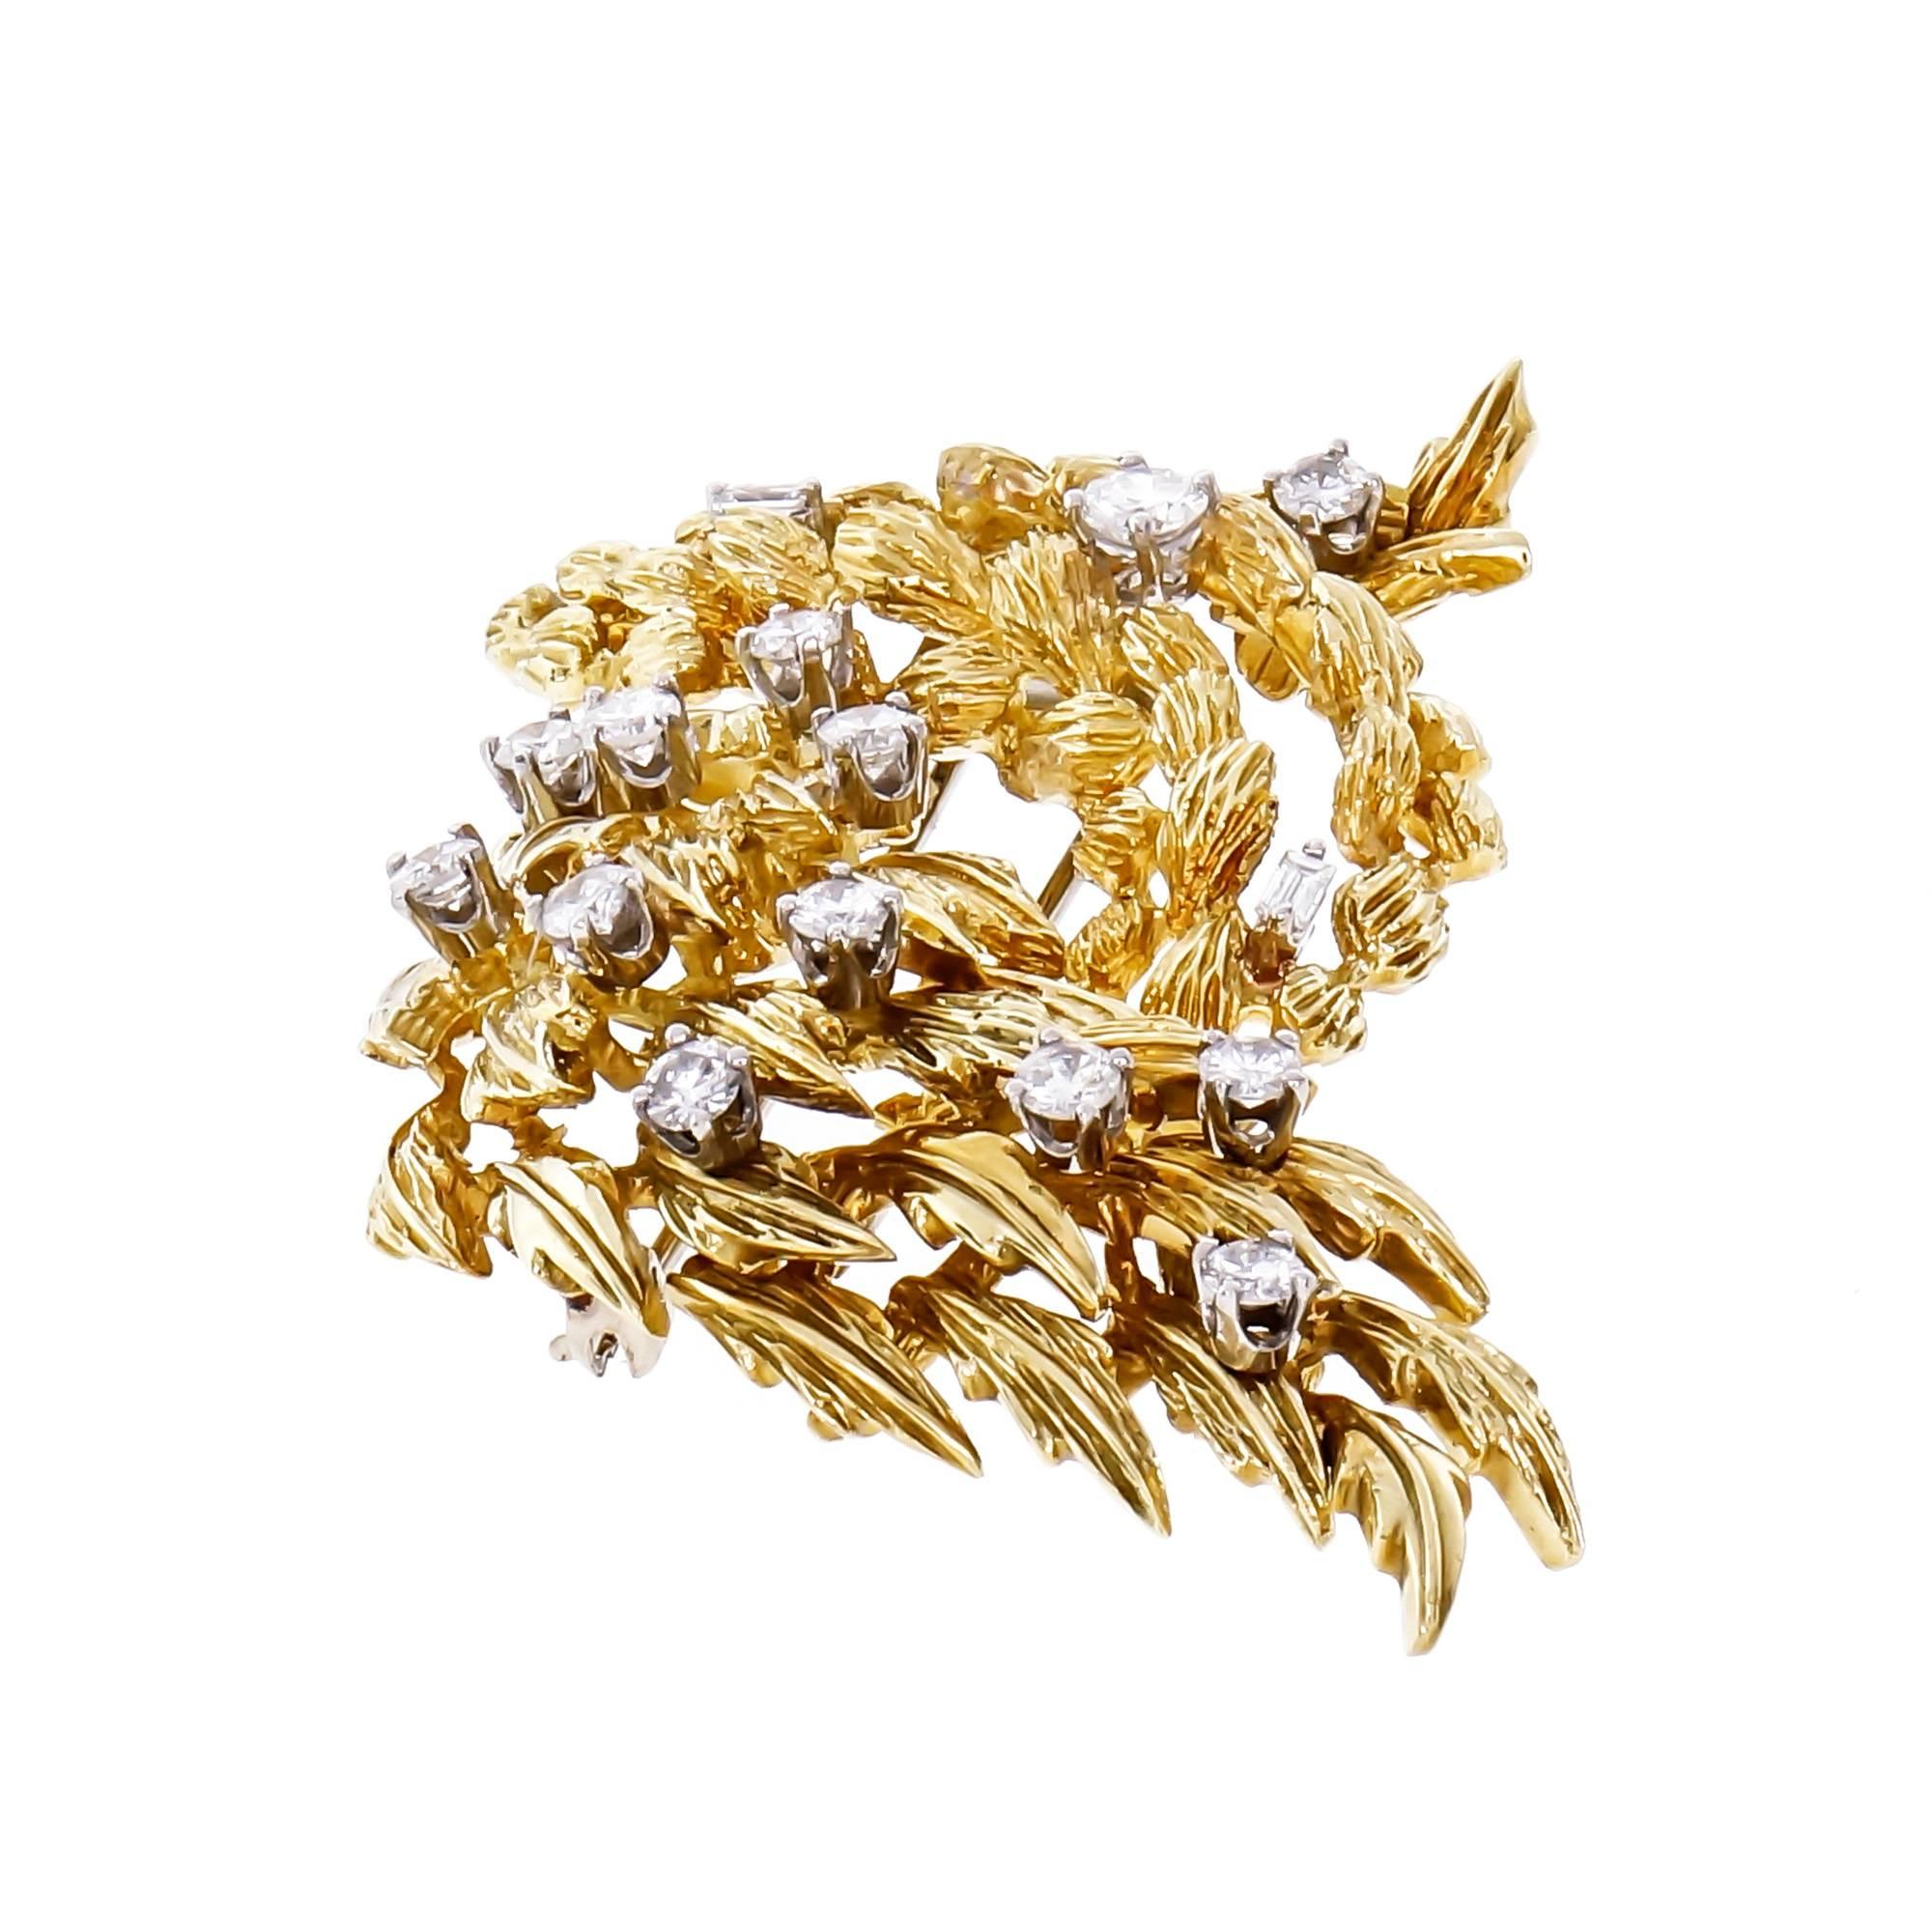 Vintage 1950s textured 18k yellow gold brooche with 2 hinged flexible sections set with brilliant cut and Baguette Diamonds. 

2-tone 18k gold
13 round Diamonds, approx. total weight 1.25cts, H – I, SI1 – I1
2 Baguette Diamonds, approx. total weight